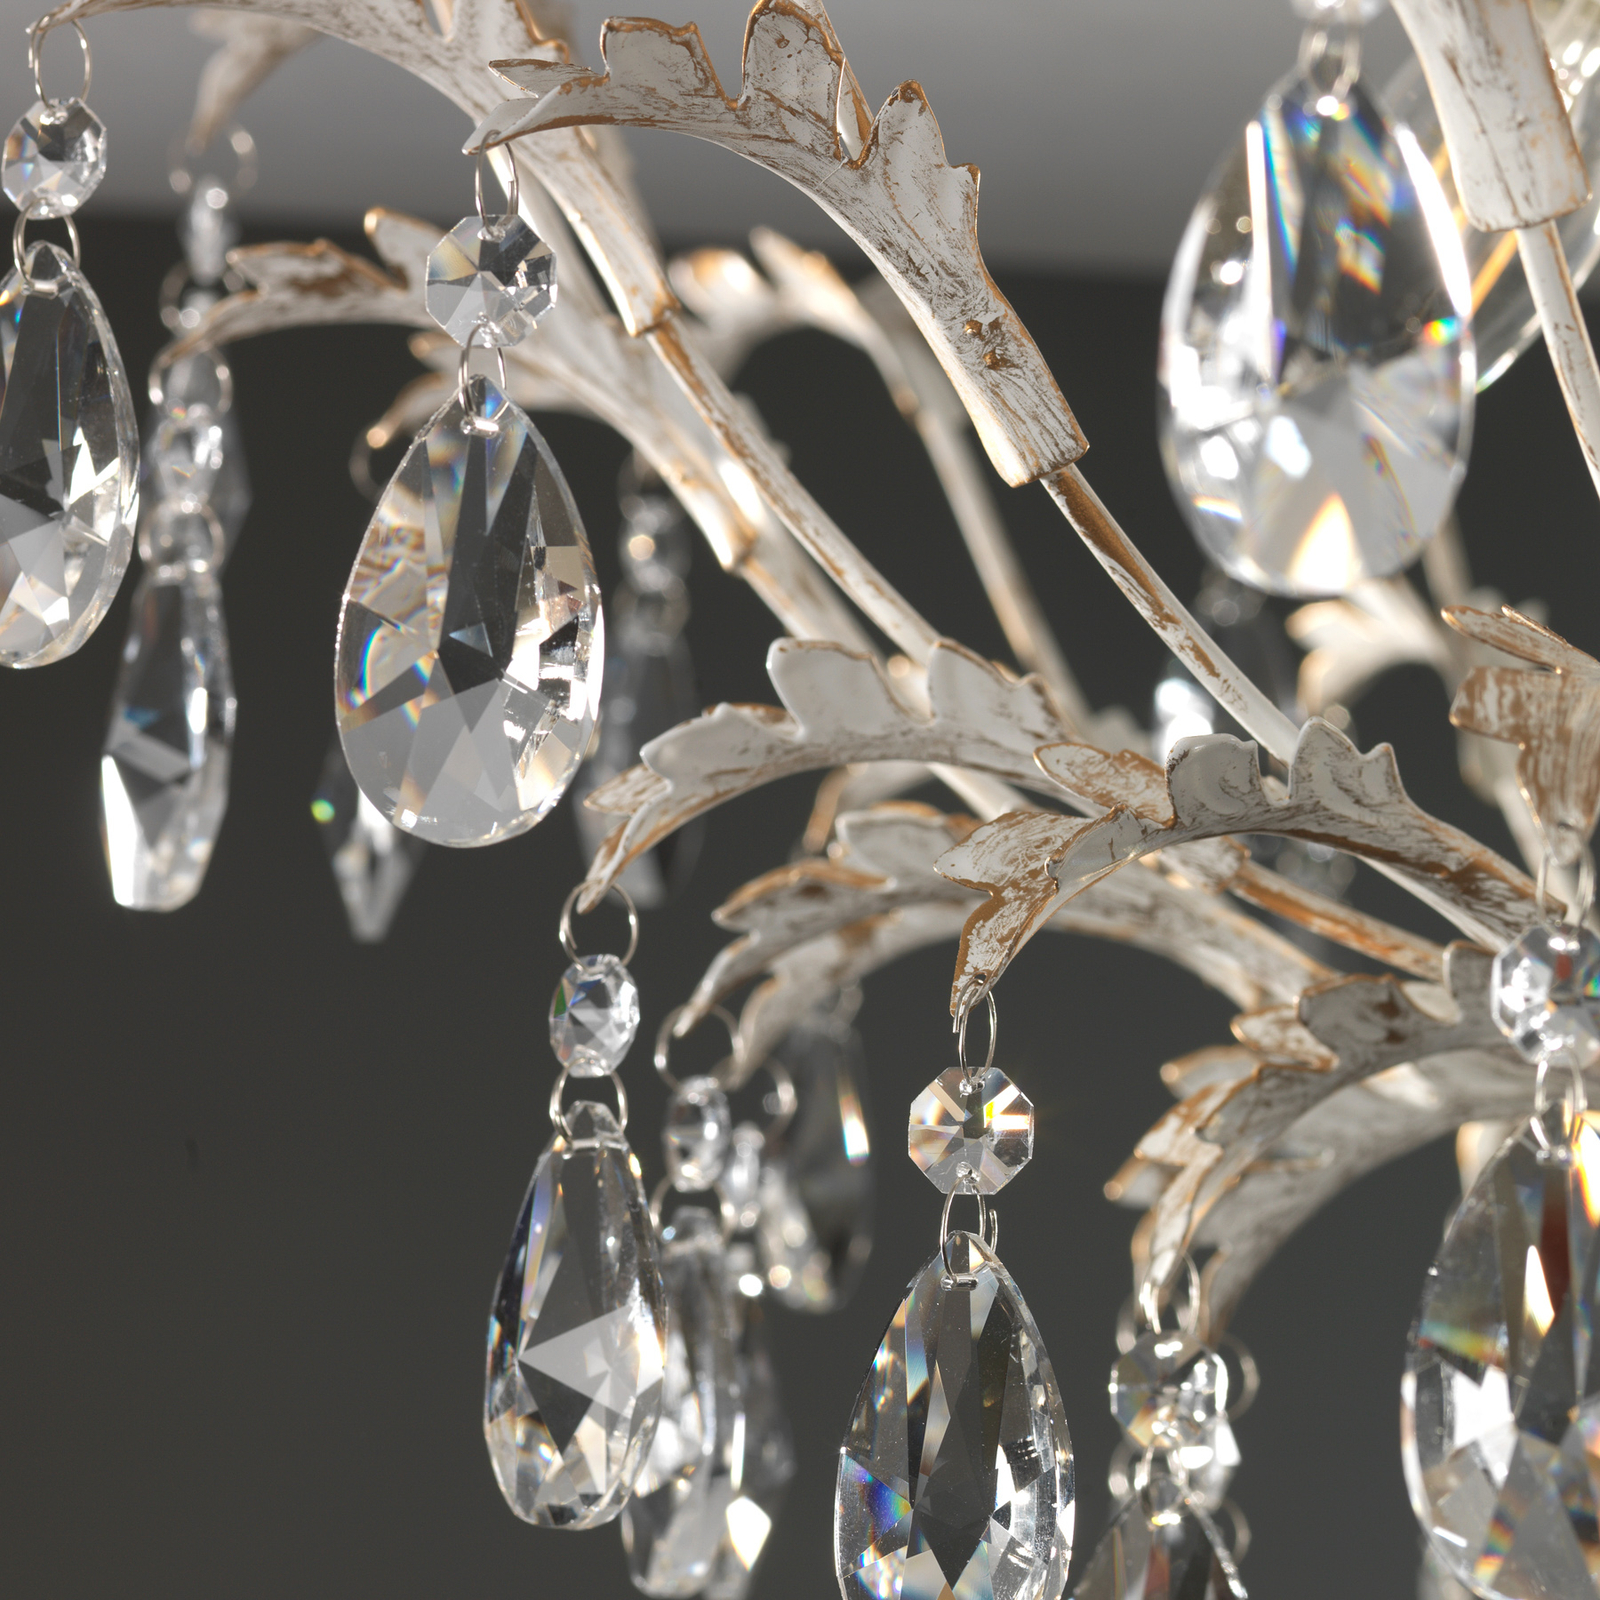 Cesta ceiling light, six-bulb with crystals